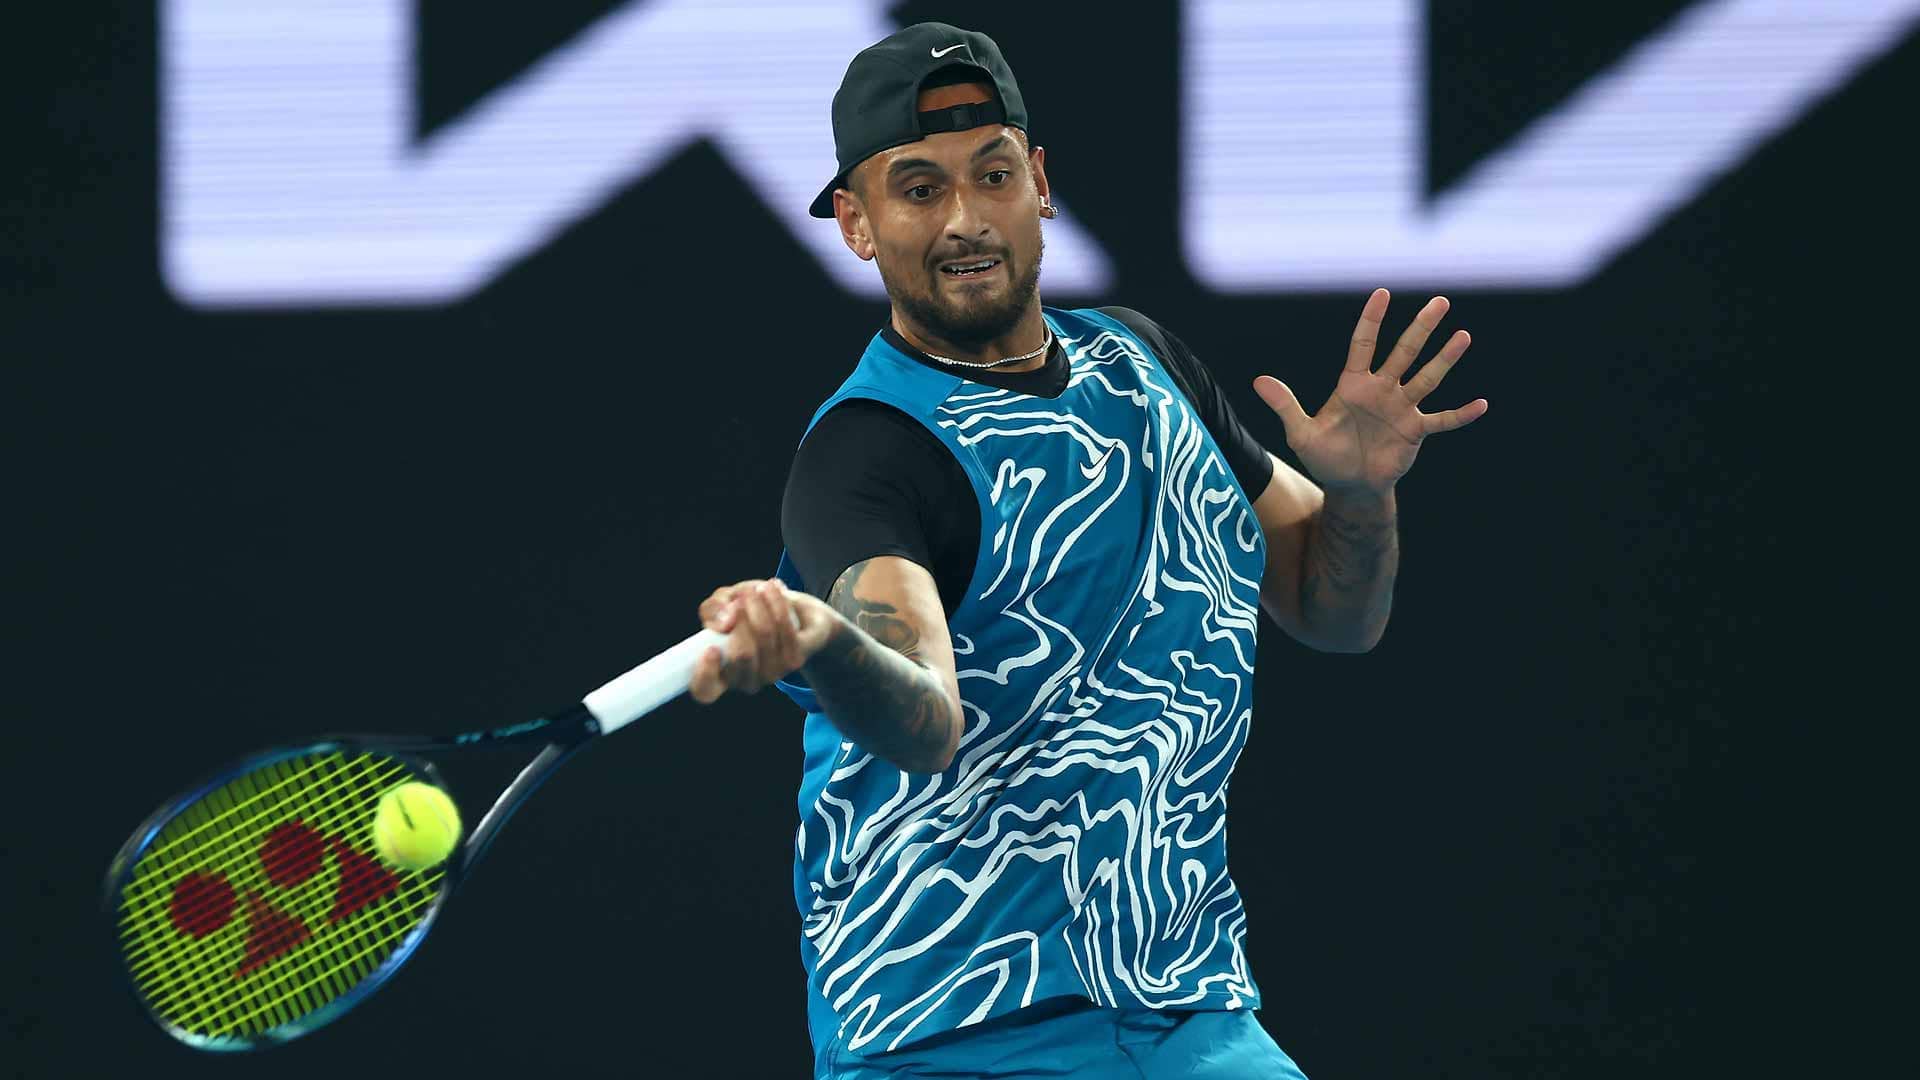 Nick Kyrgios fires a forehand during a charity match against Novak Djokovic on Friday night in Melbourne.